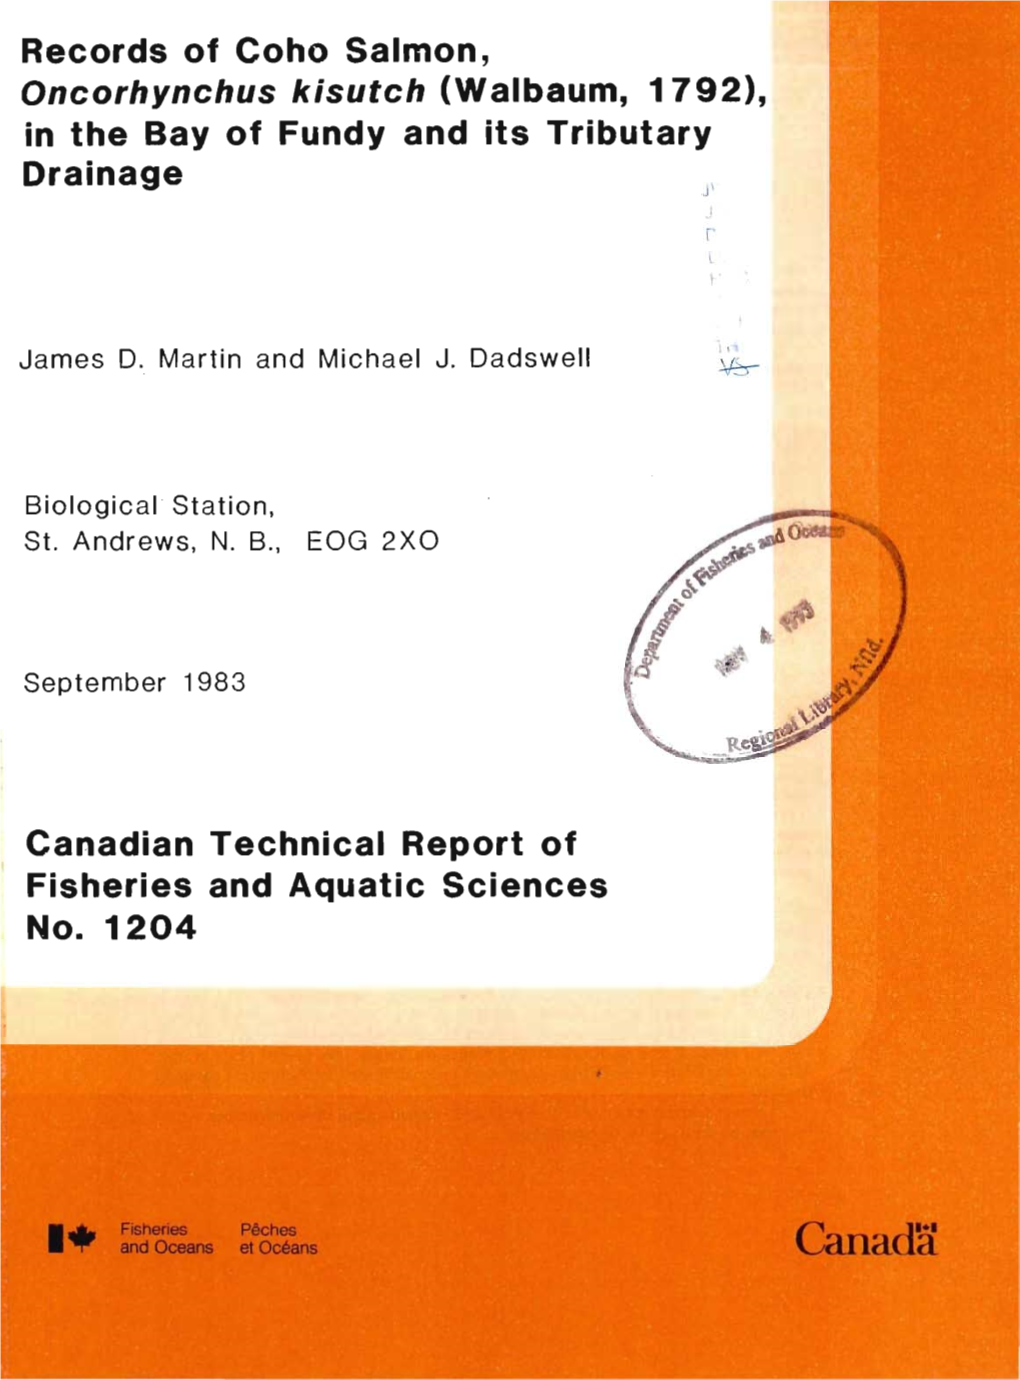 Records of Coho Salmon, in the Bay of Fundy and Its Tributary Drainage